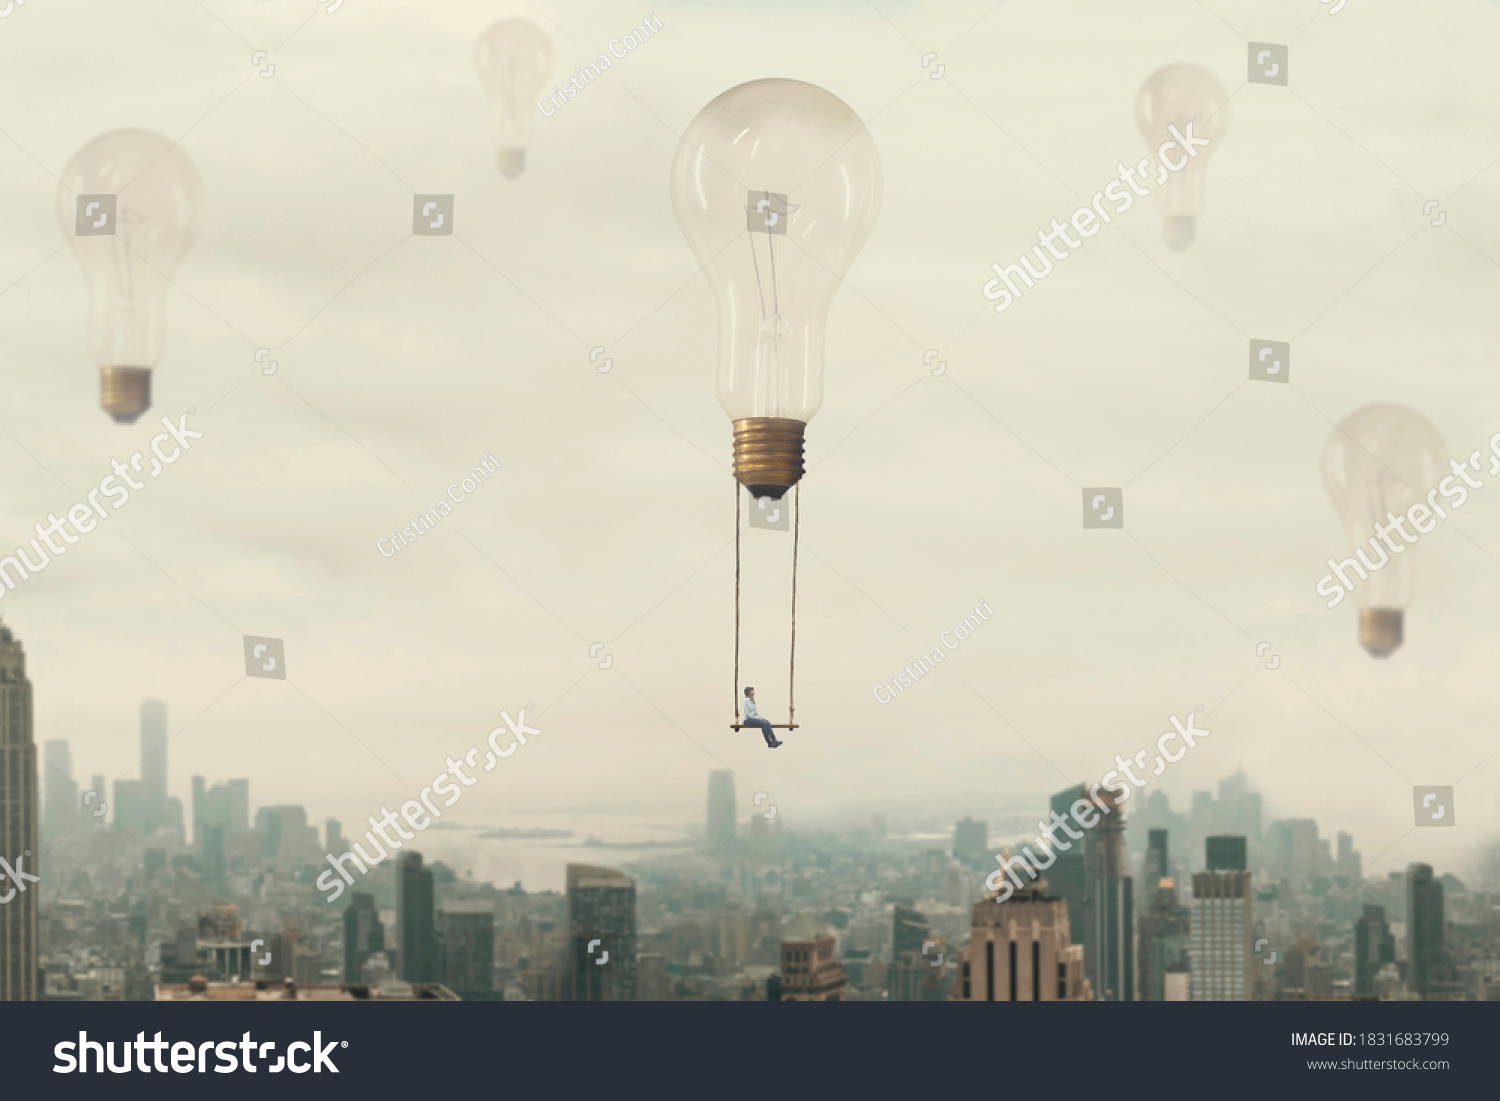 surreal moment of a woman traveling on a swing carried by a light bulb over a metropolis #1831683799